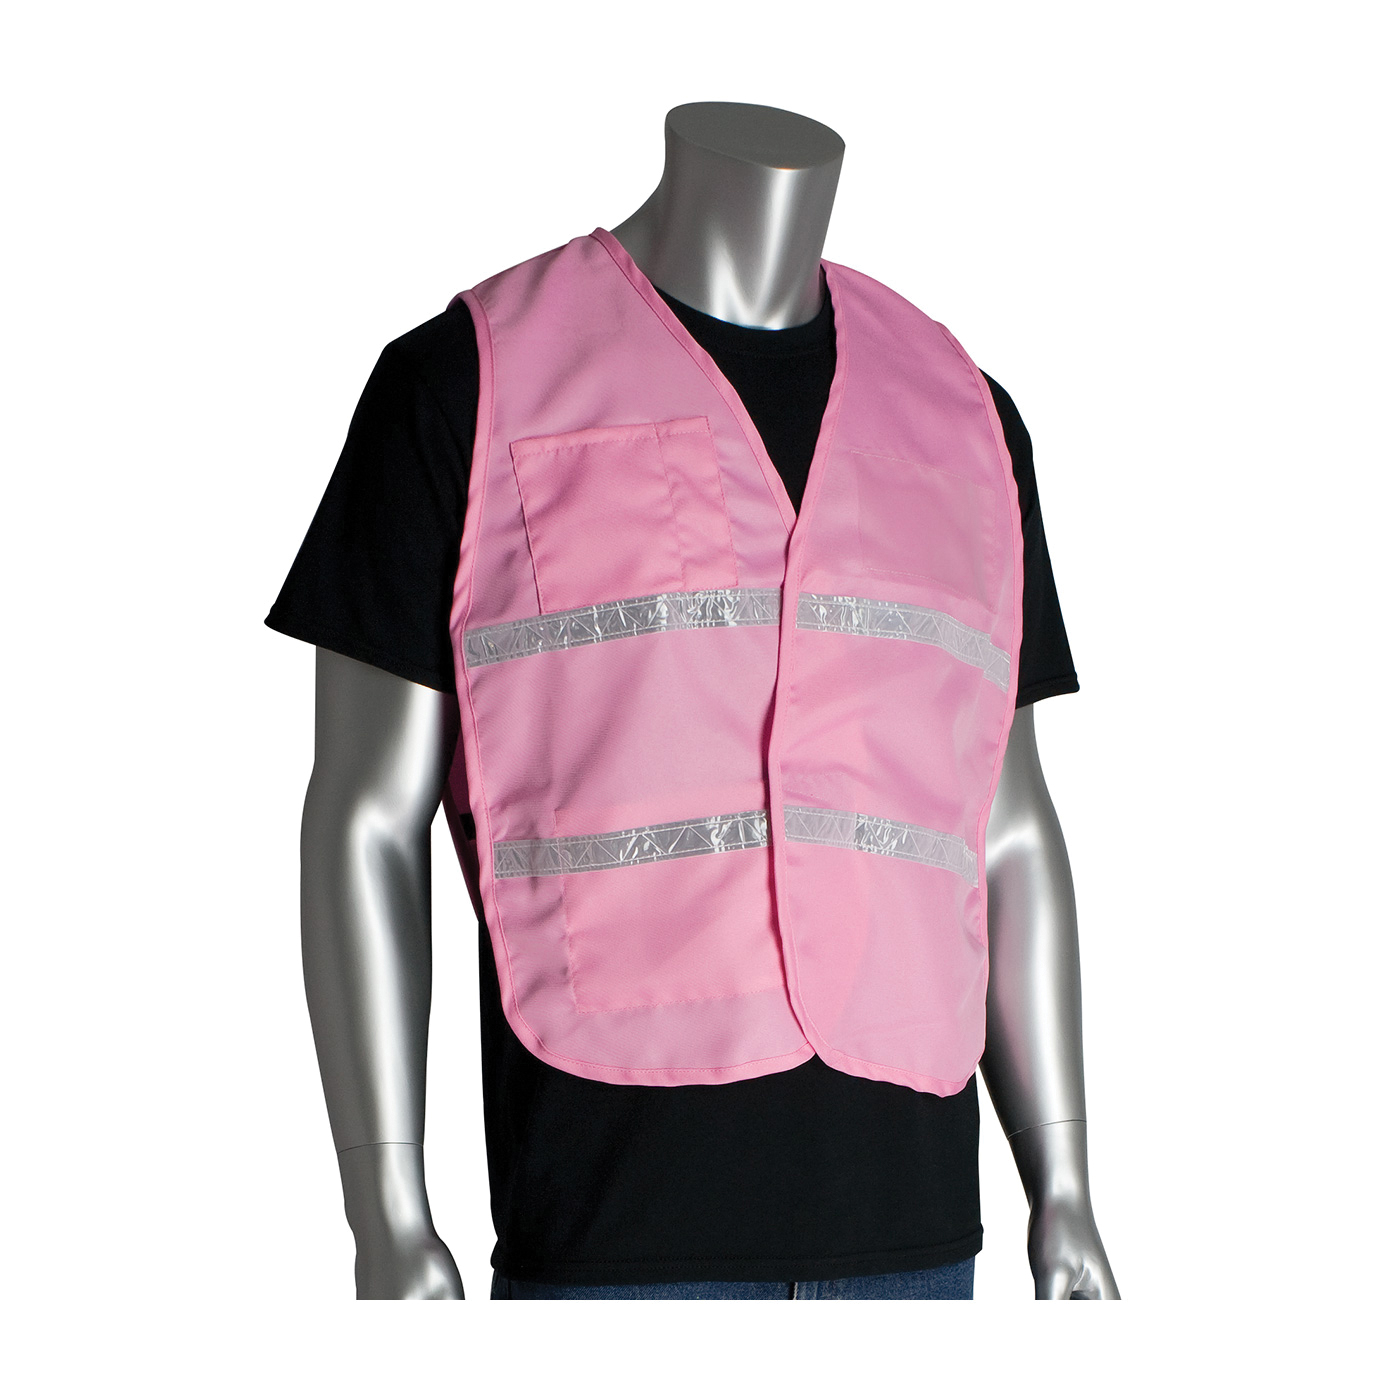 PIP® 300-1516/2X-3X Incident Command Vest, 2XL/3XL, Pink, Polyester, 42.1 in Chest, Hook and Loop Closure